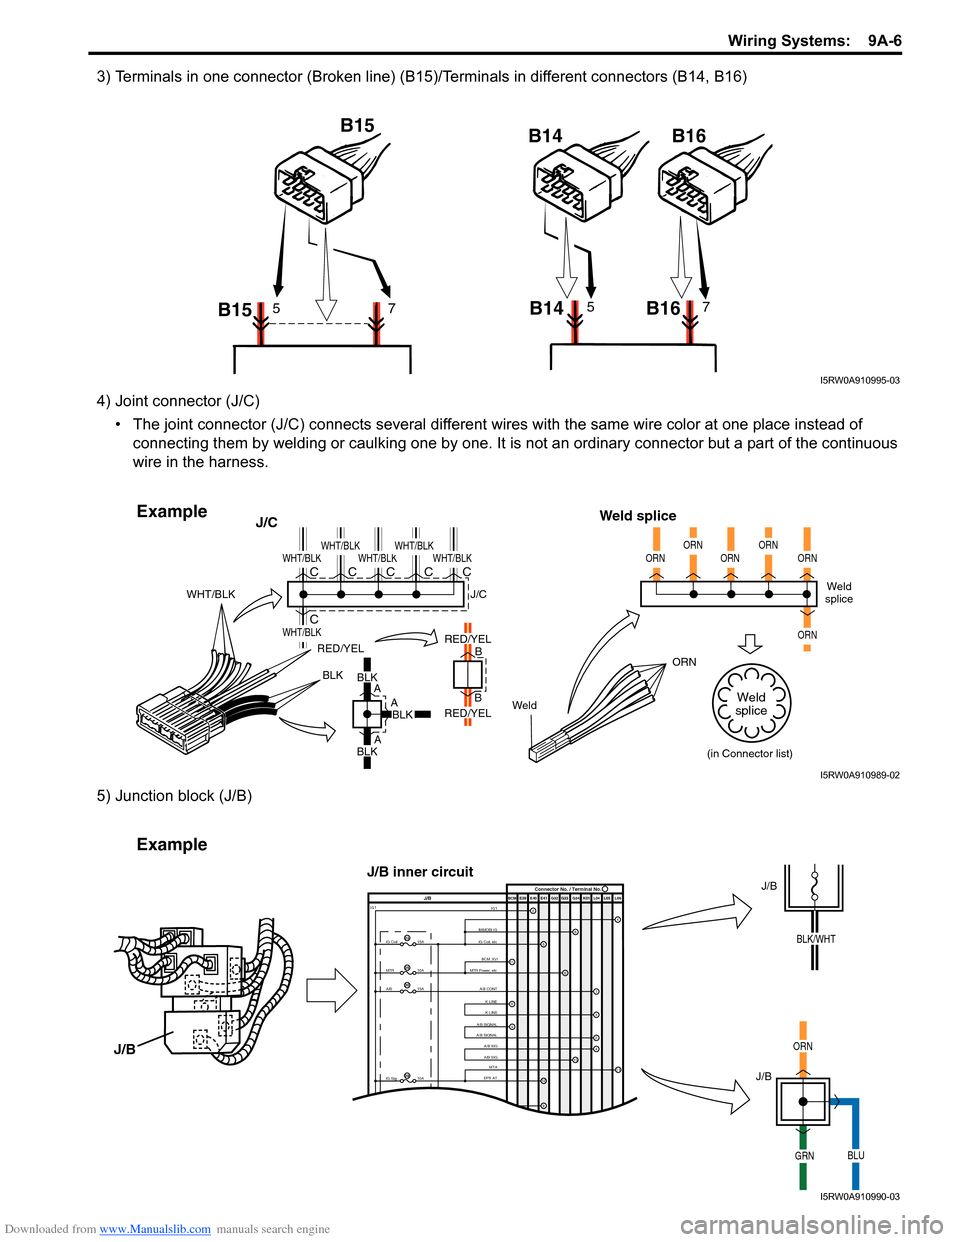 SUZUKI SWIFT 2006 2.G Service Workshop Manual Downloaded from www.Manualslib.com manuals search engine Wiring Systems:  9A-6
3) Terminals in one connector (Broken line) (B15)/Terminals in different connectors (B14, B16)
4) Joint connector (J/C)�